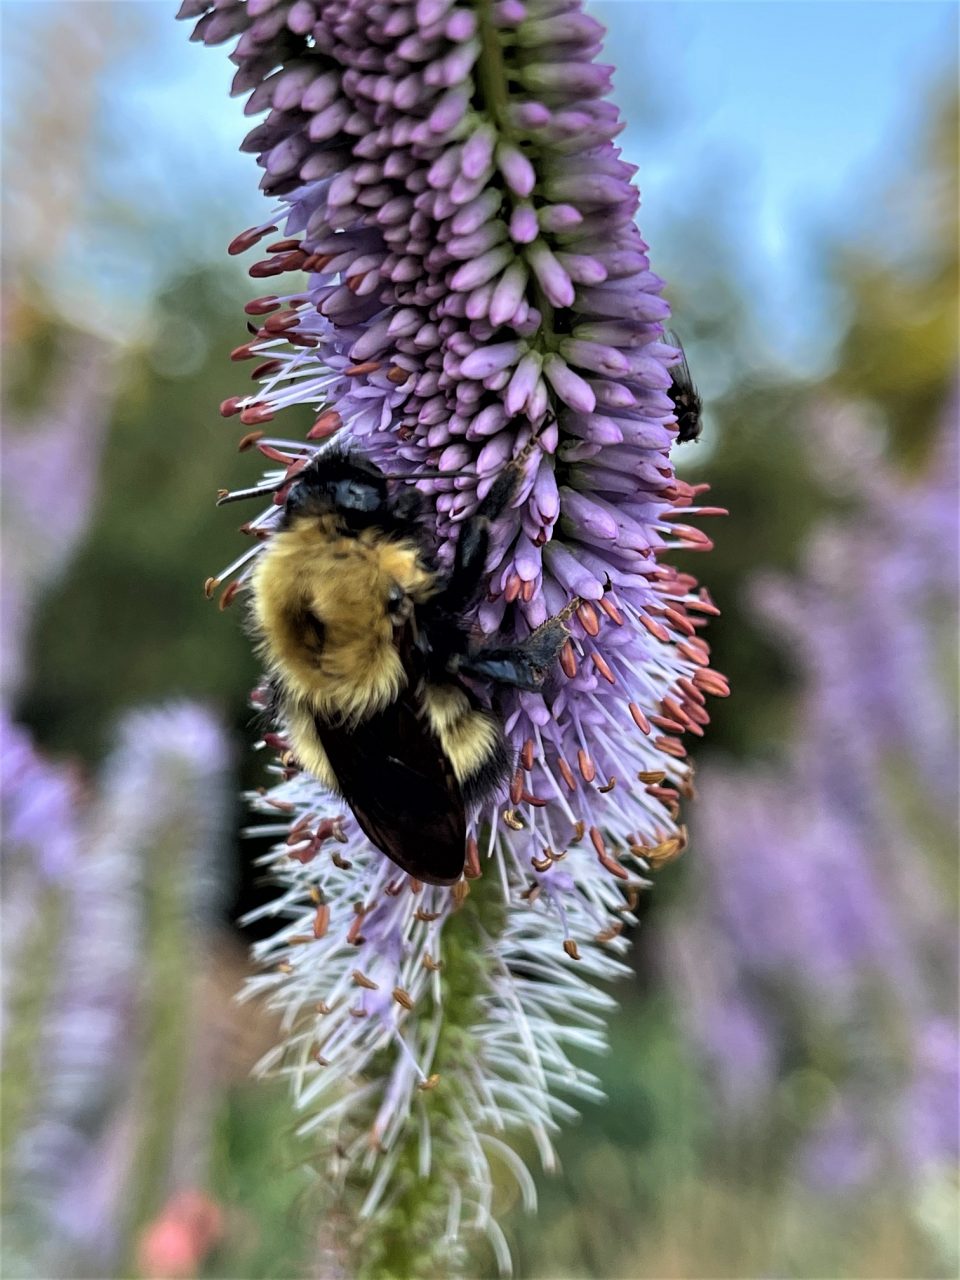 Veronicastrum is a bee magnet in the fall